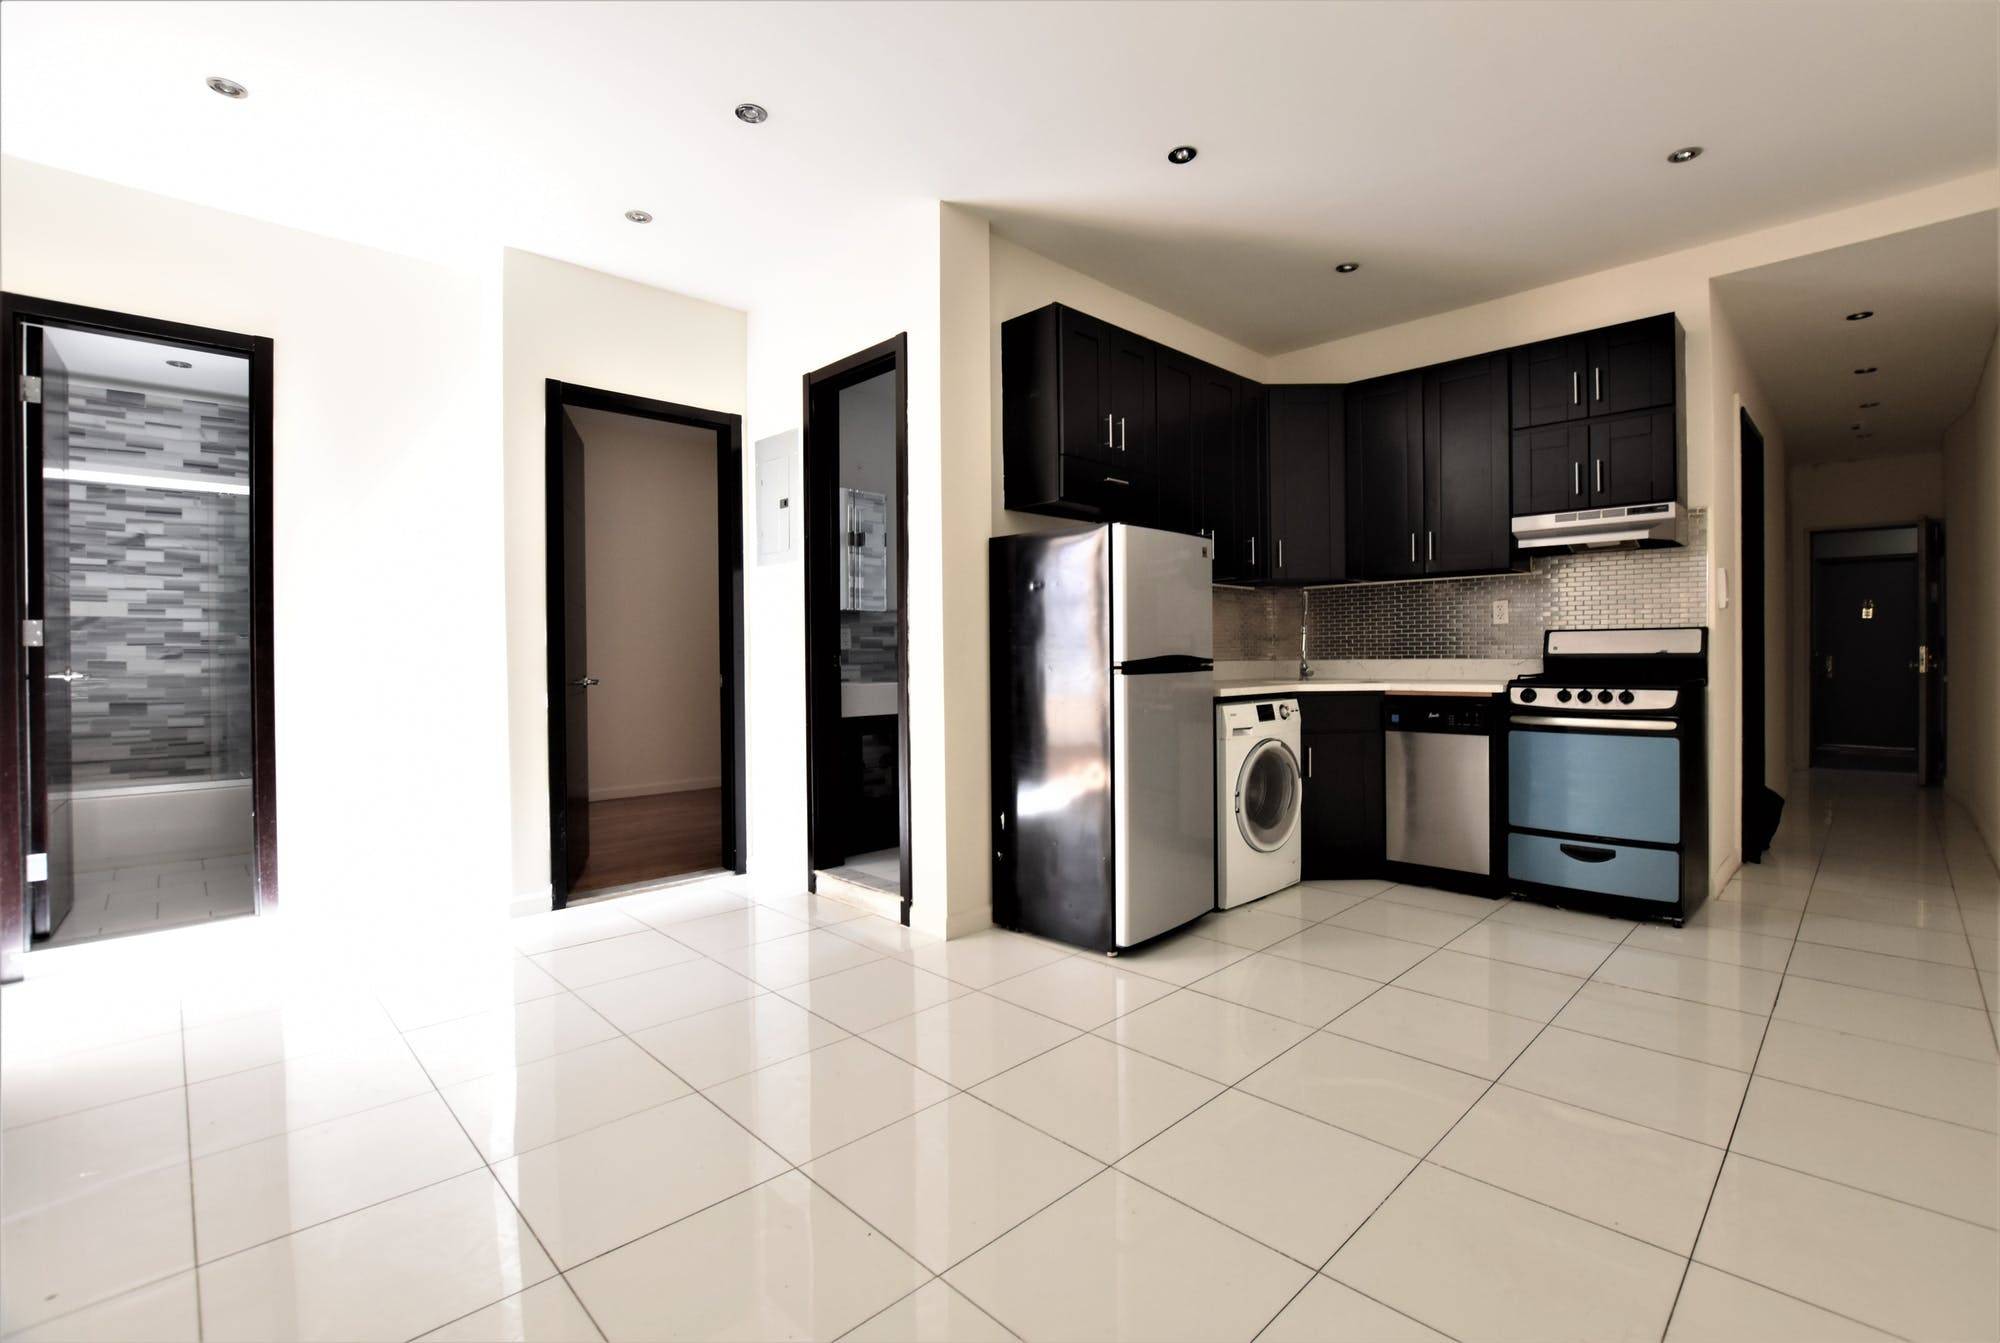 This is a new renovated 4 bedroom 2 Bath on West 115th Street near Columbia University.